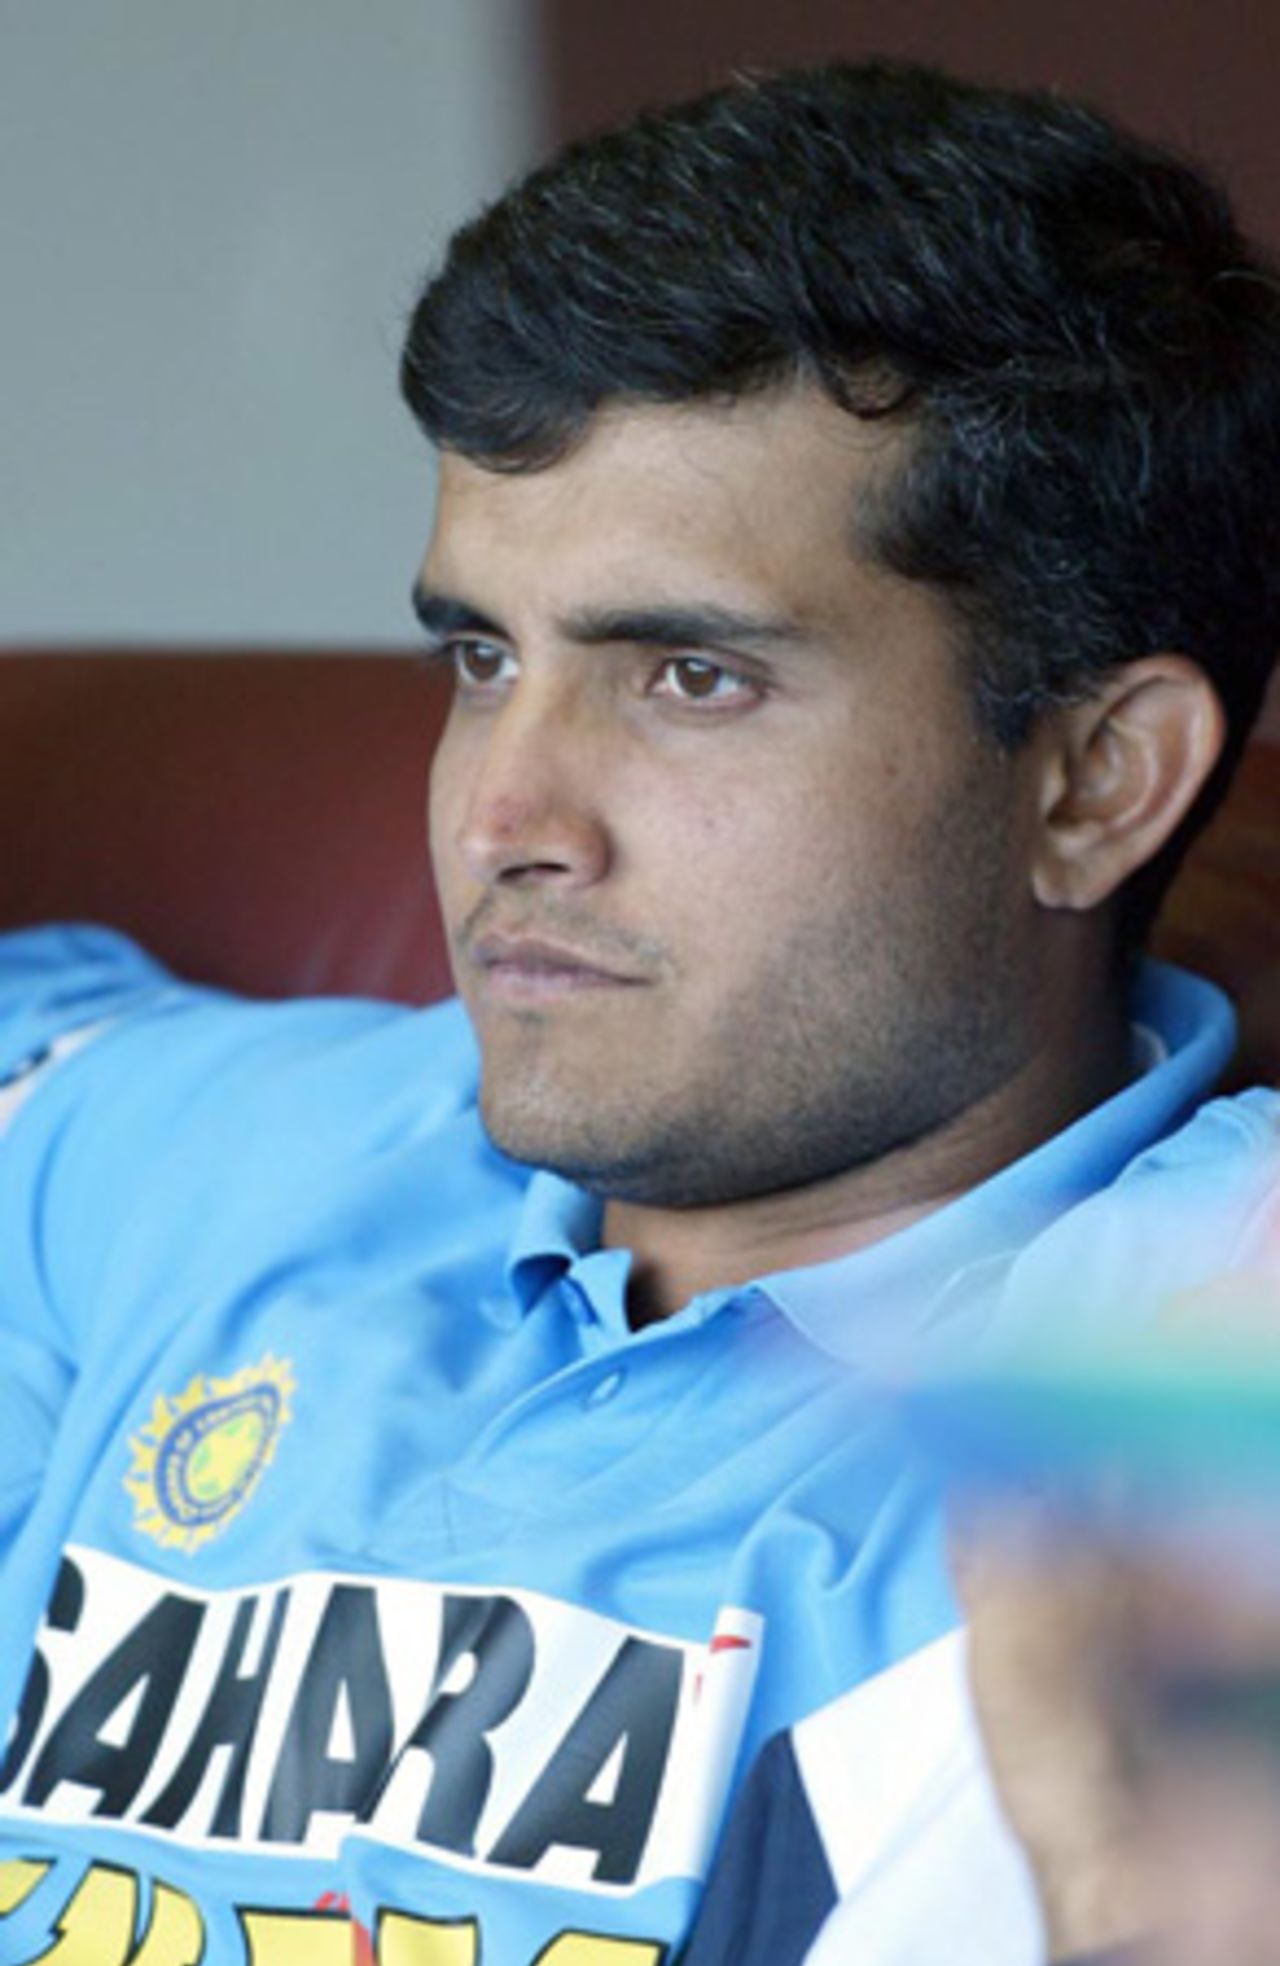 Indian captain Sourav Ganguly looks on at the action on the field during his team's innings. 3rd ODI: New Zealand v India at Jade Stadium, Christchurch, 1 January 2003.